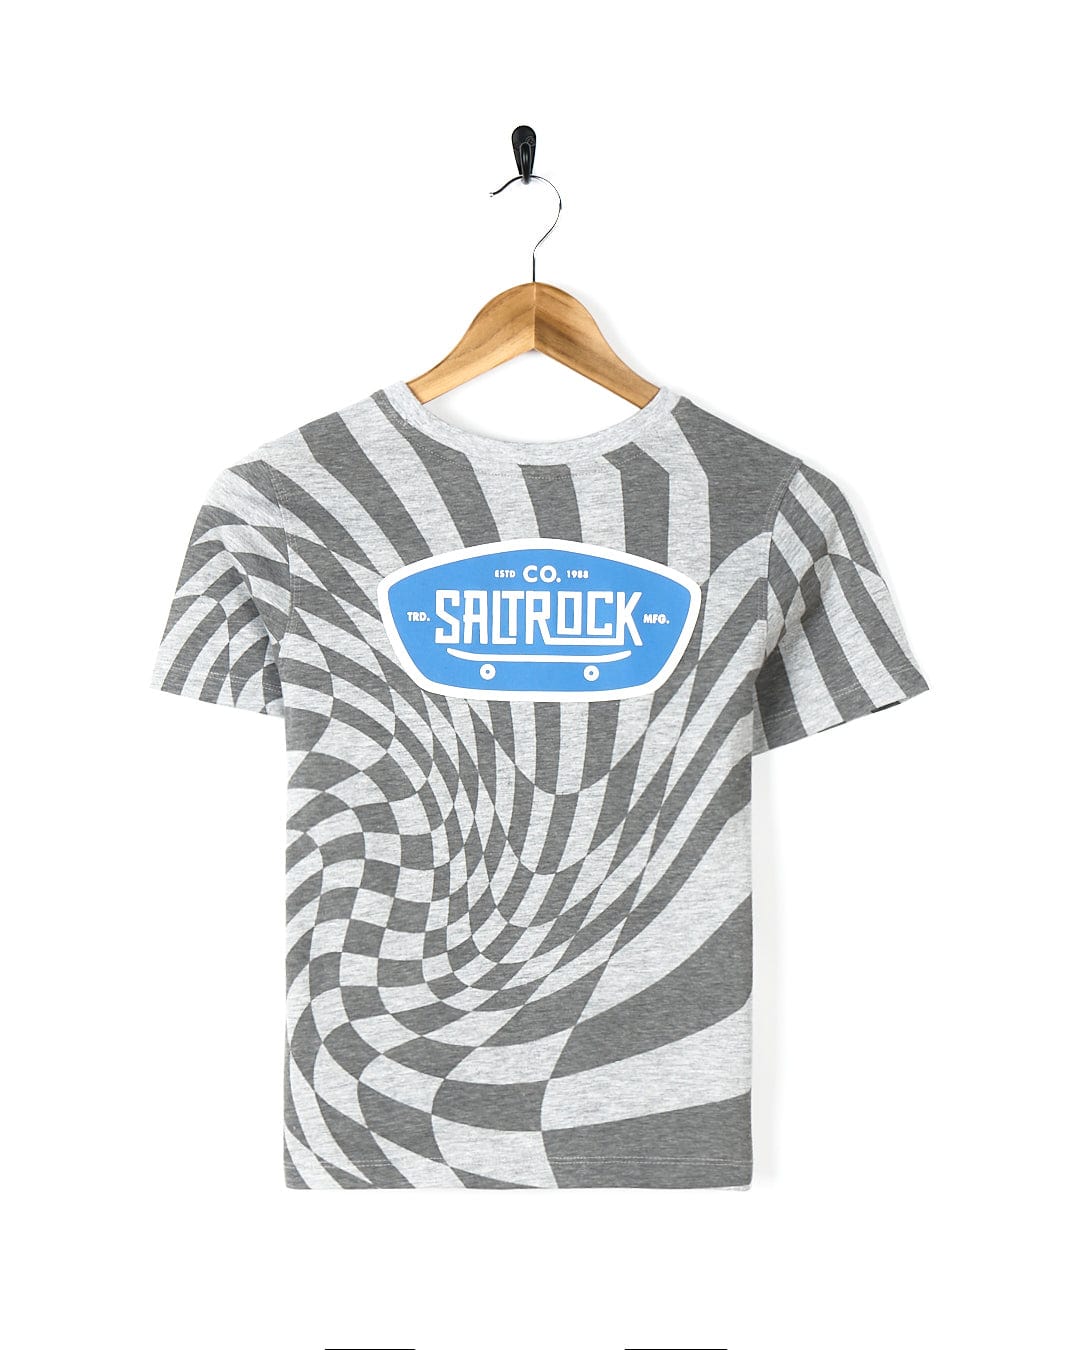 A geometric all-over print t-shirt with the Saltrock badge and the words shoprock on it.